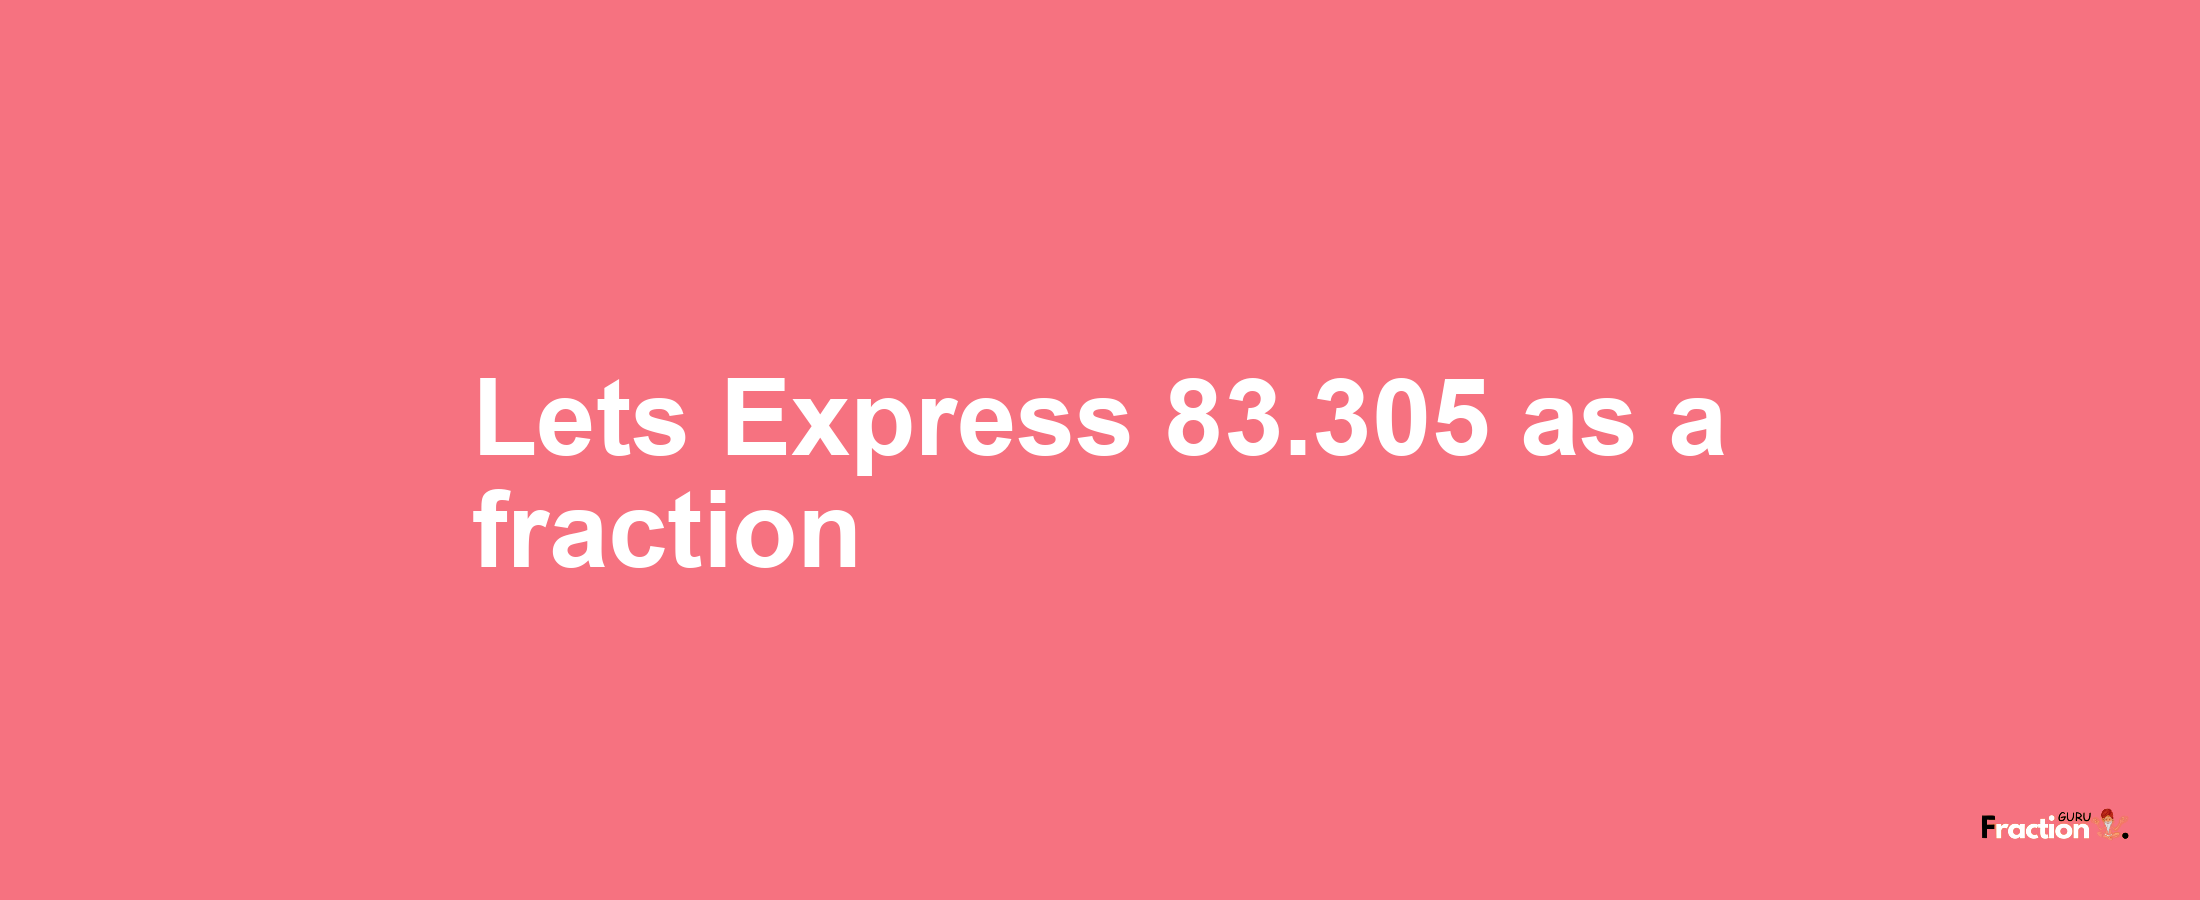 Lets Express 83.305 as afraction